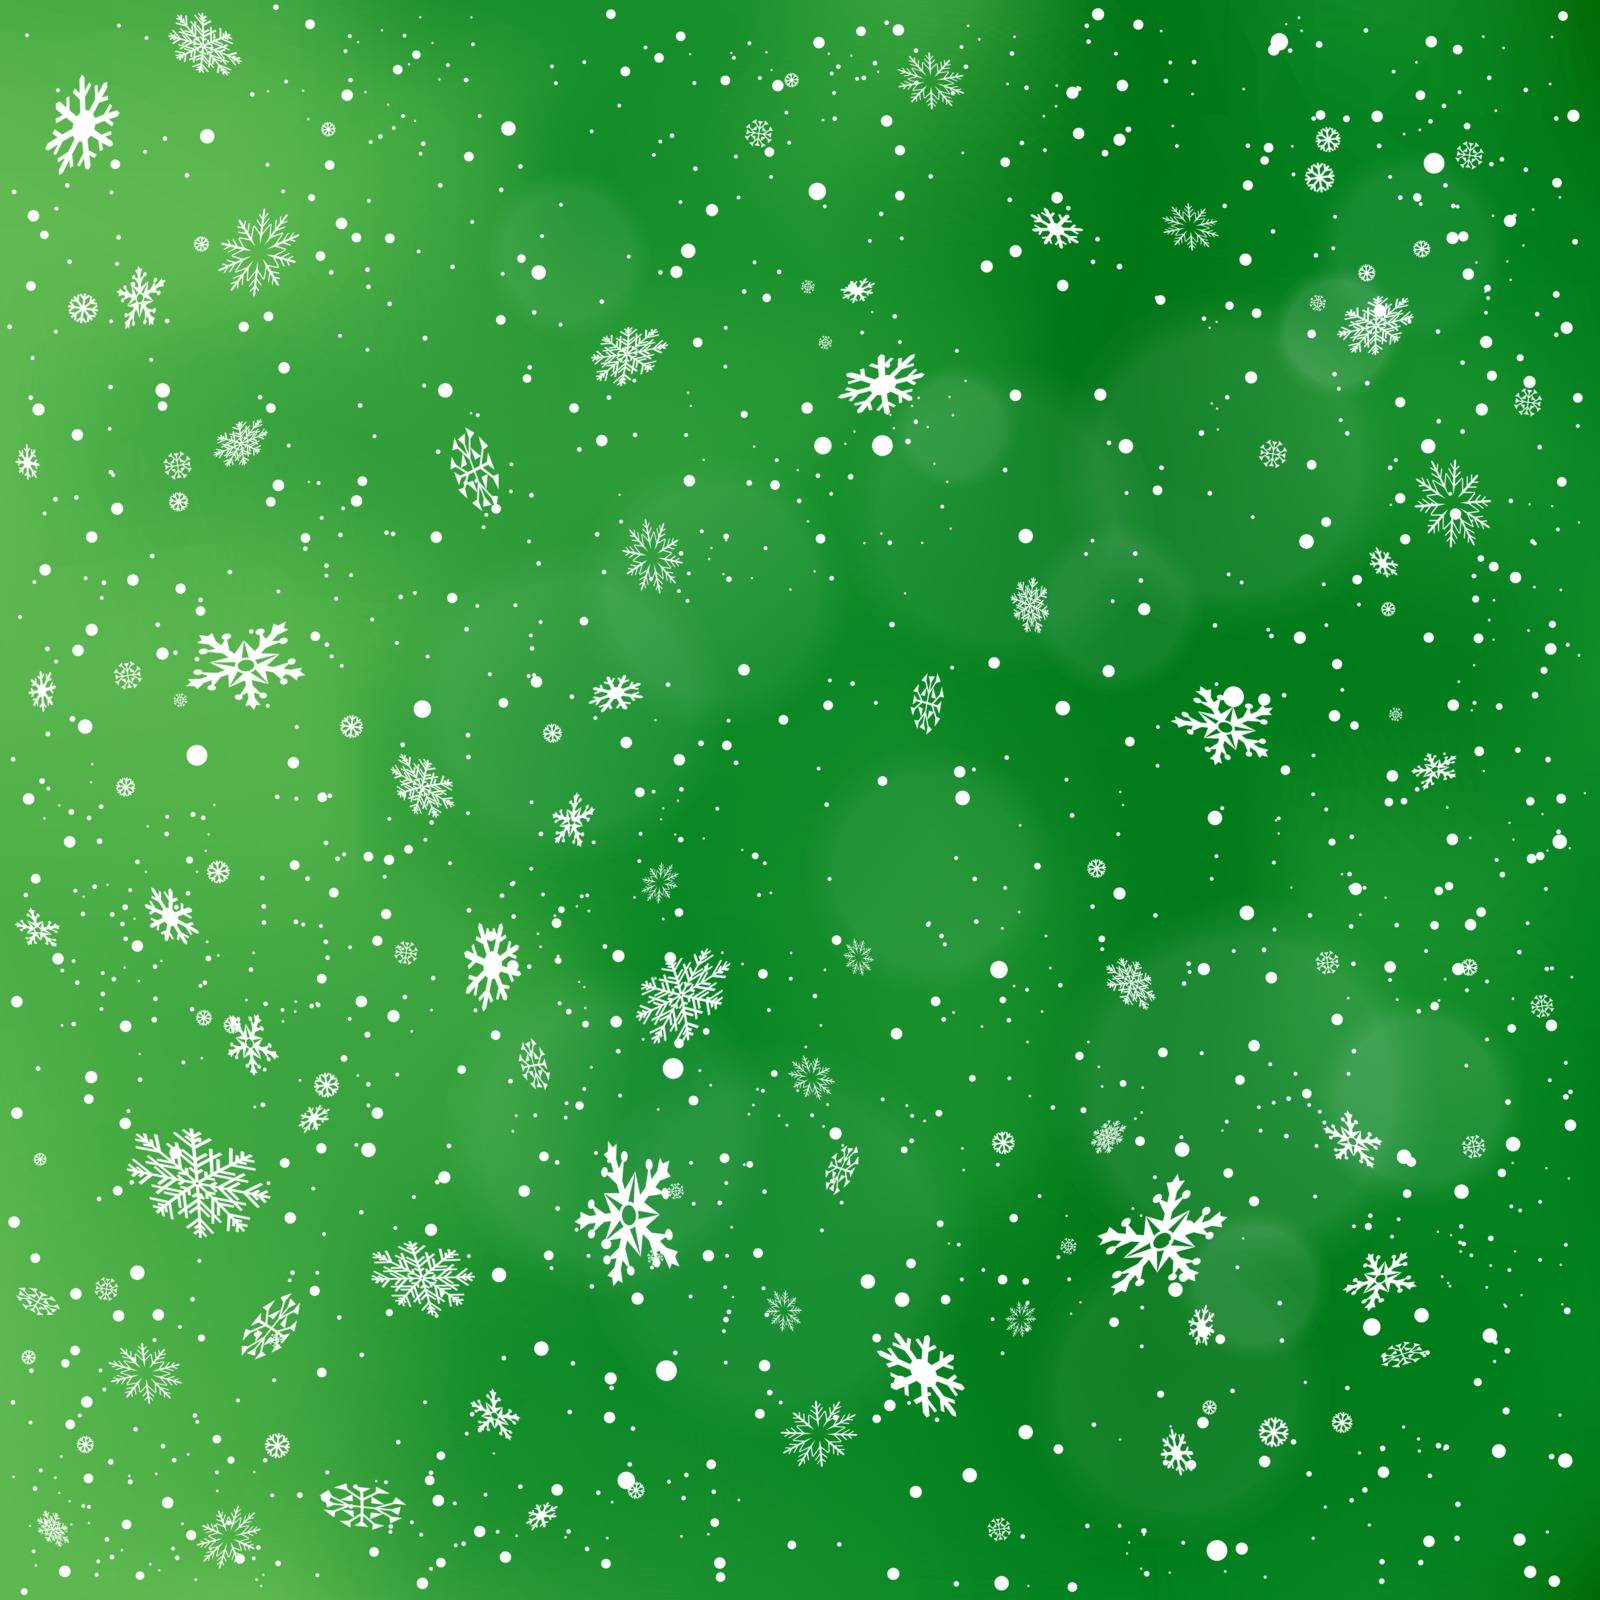 Closeup snowfall on green backdrop. Winter holiday Christmas background. Big and small snowflakes falling from clouds